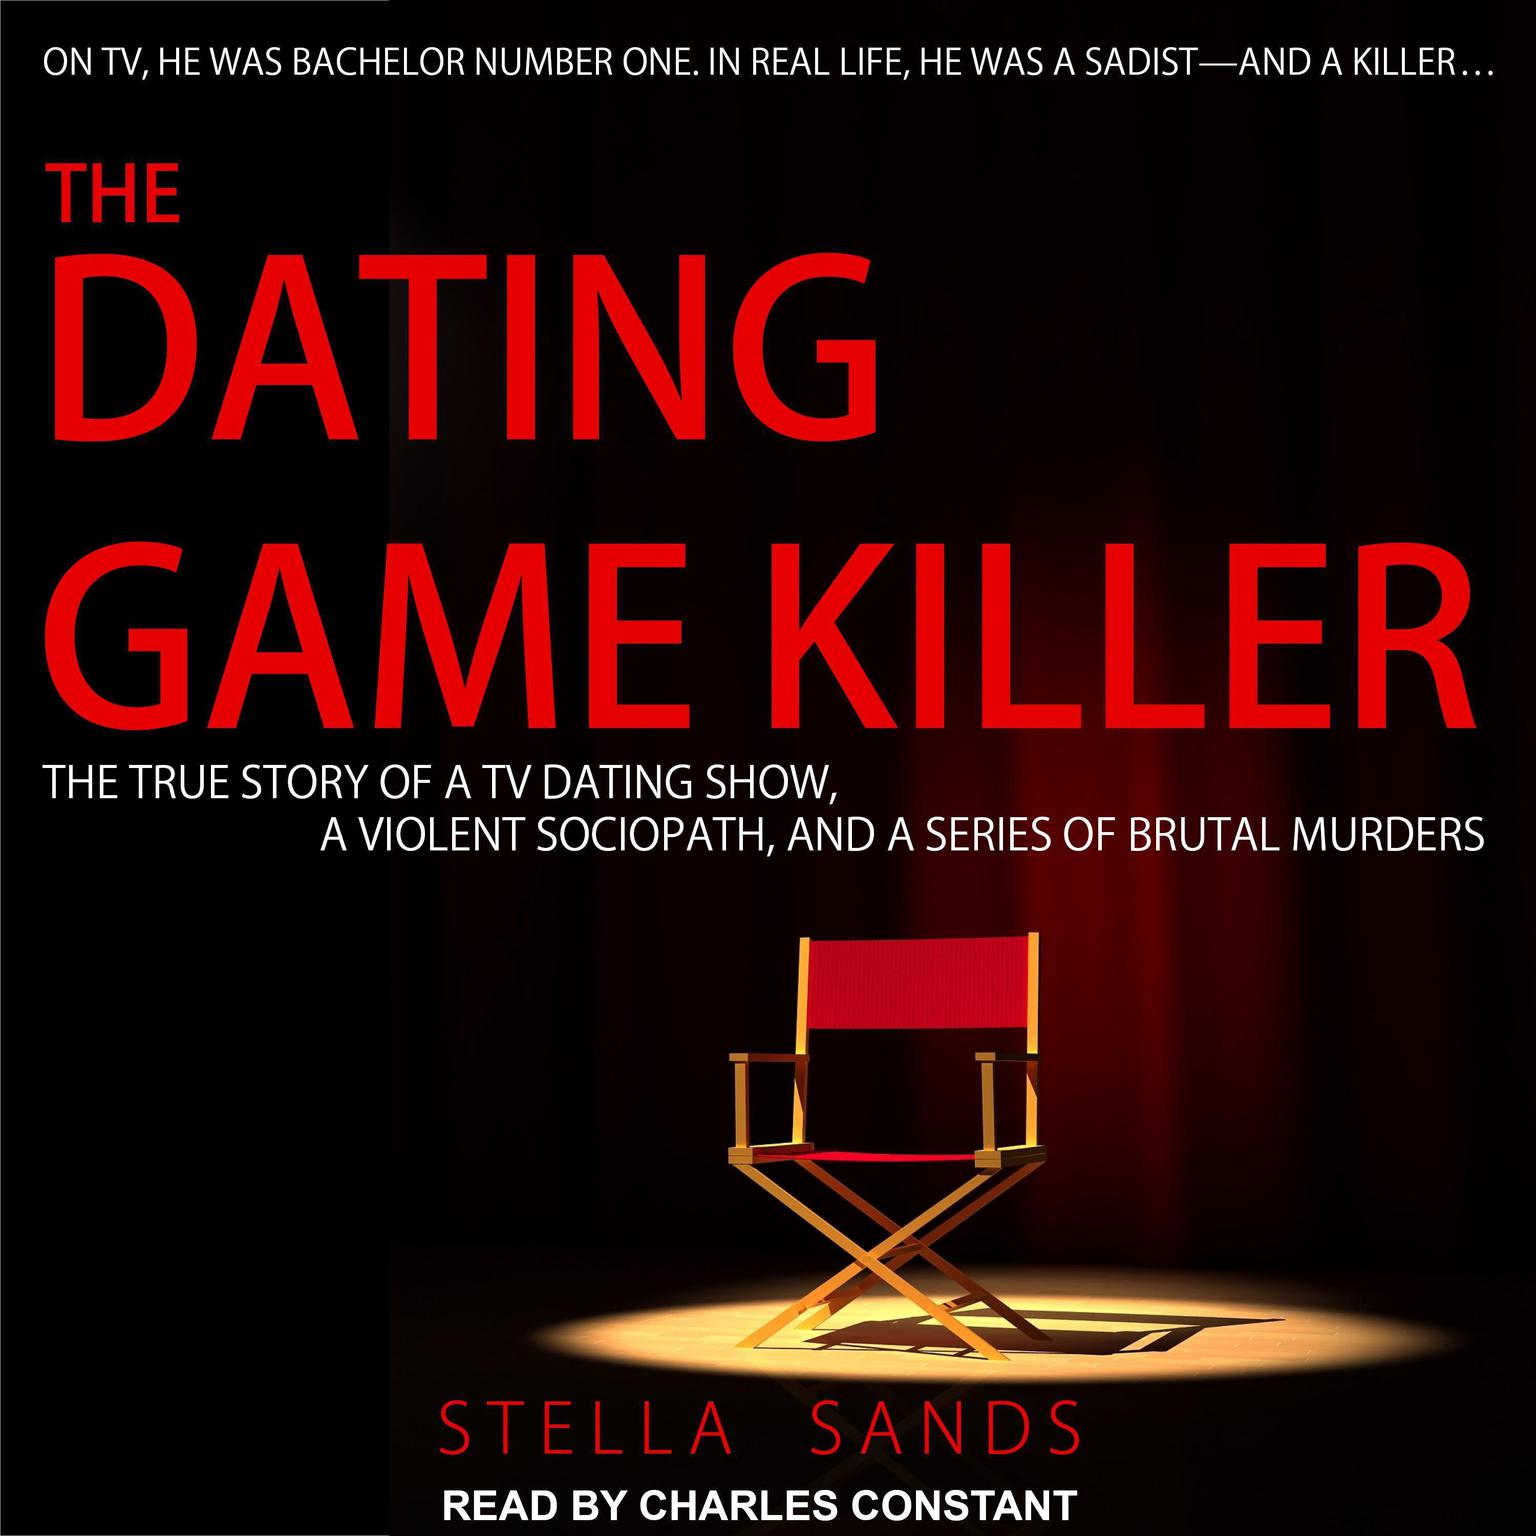 The Dating Game Killer: The True Story of a TV Dating Show, a Violent Sociopath, and a Series of Brutal Murders Audiobook, by Stella Sands